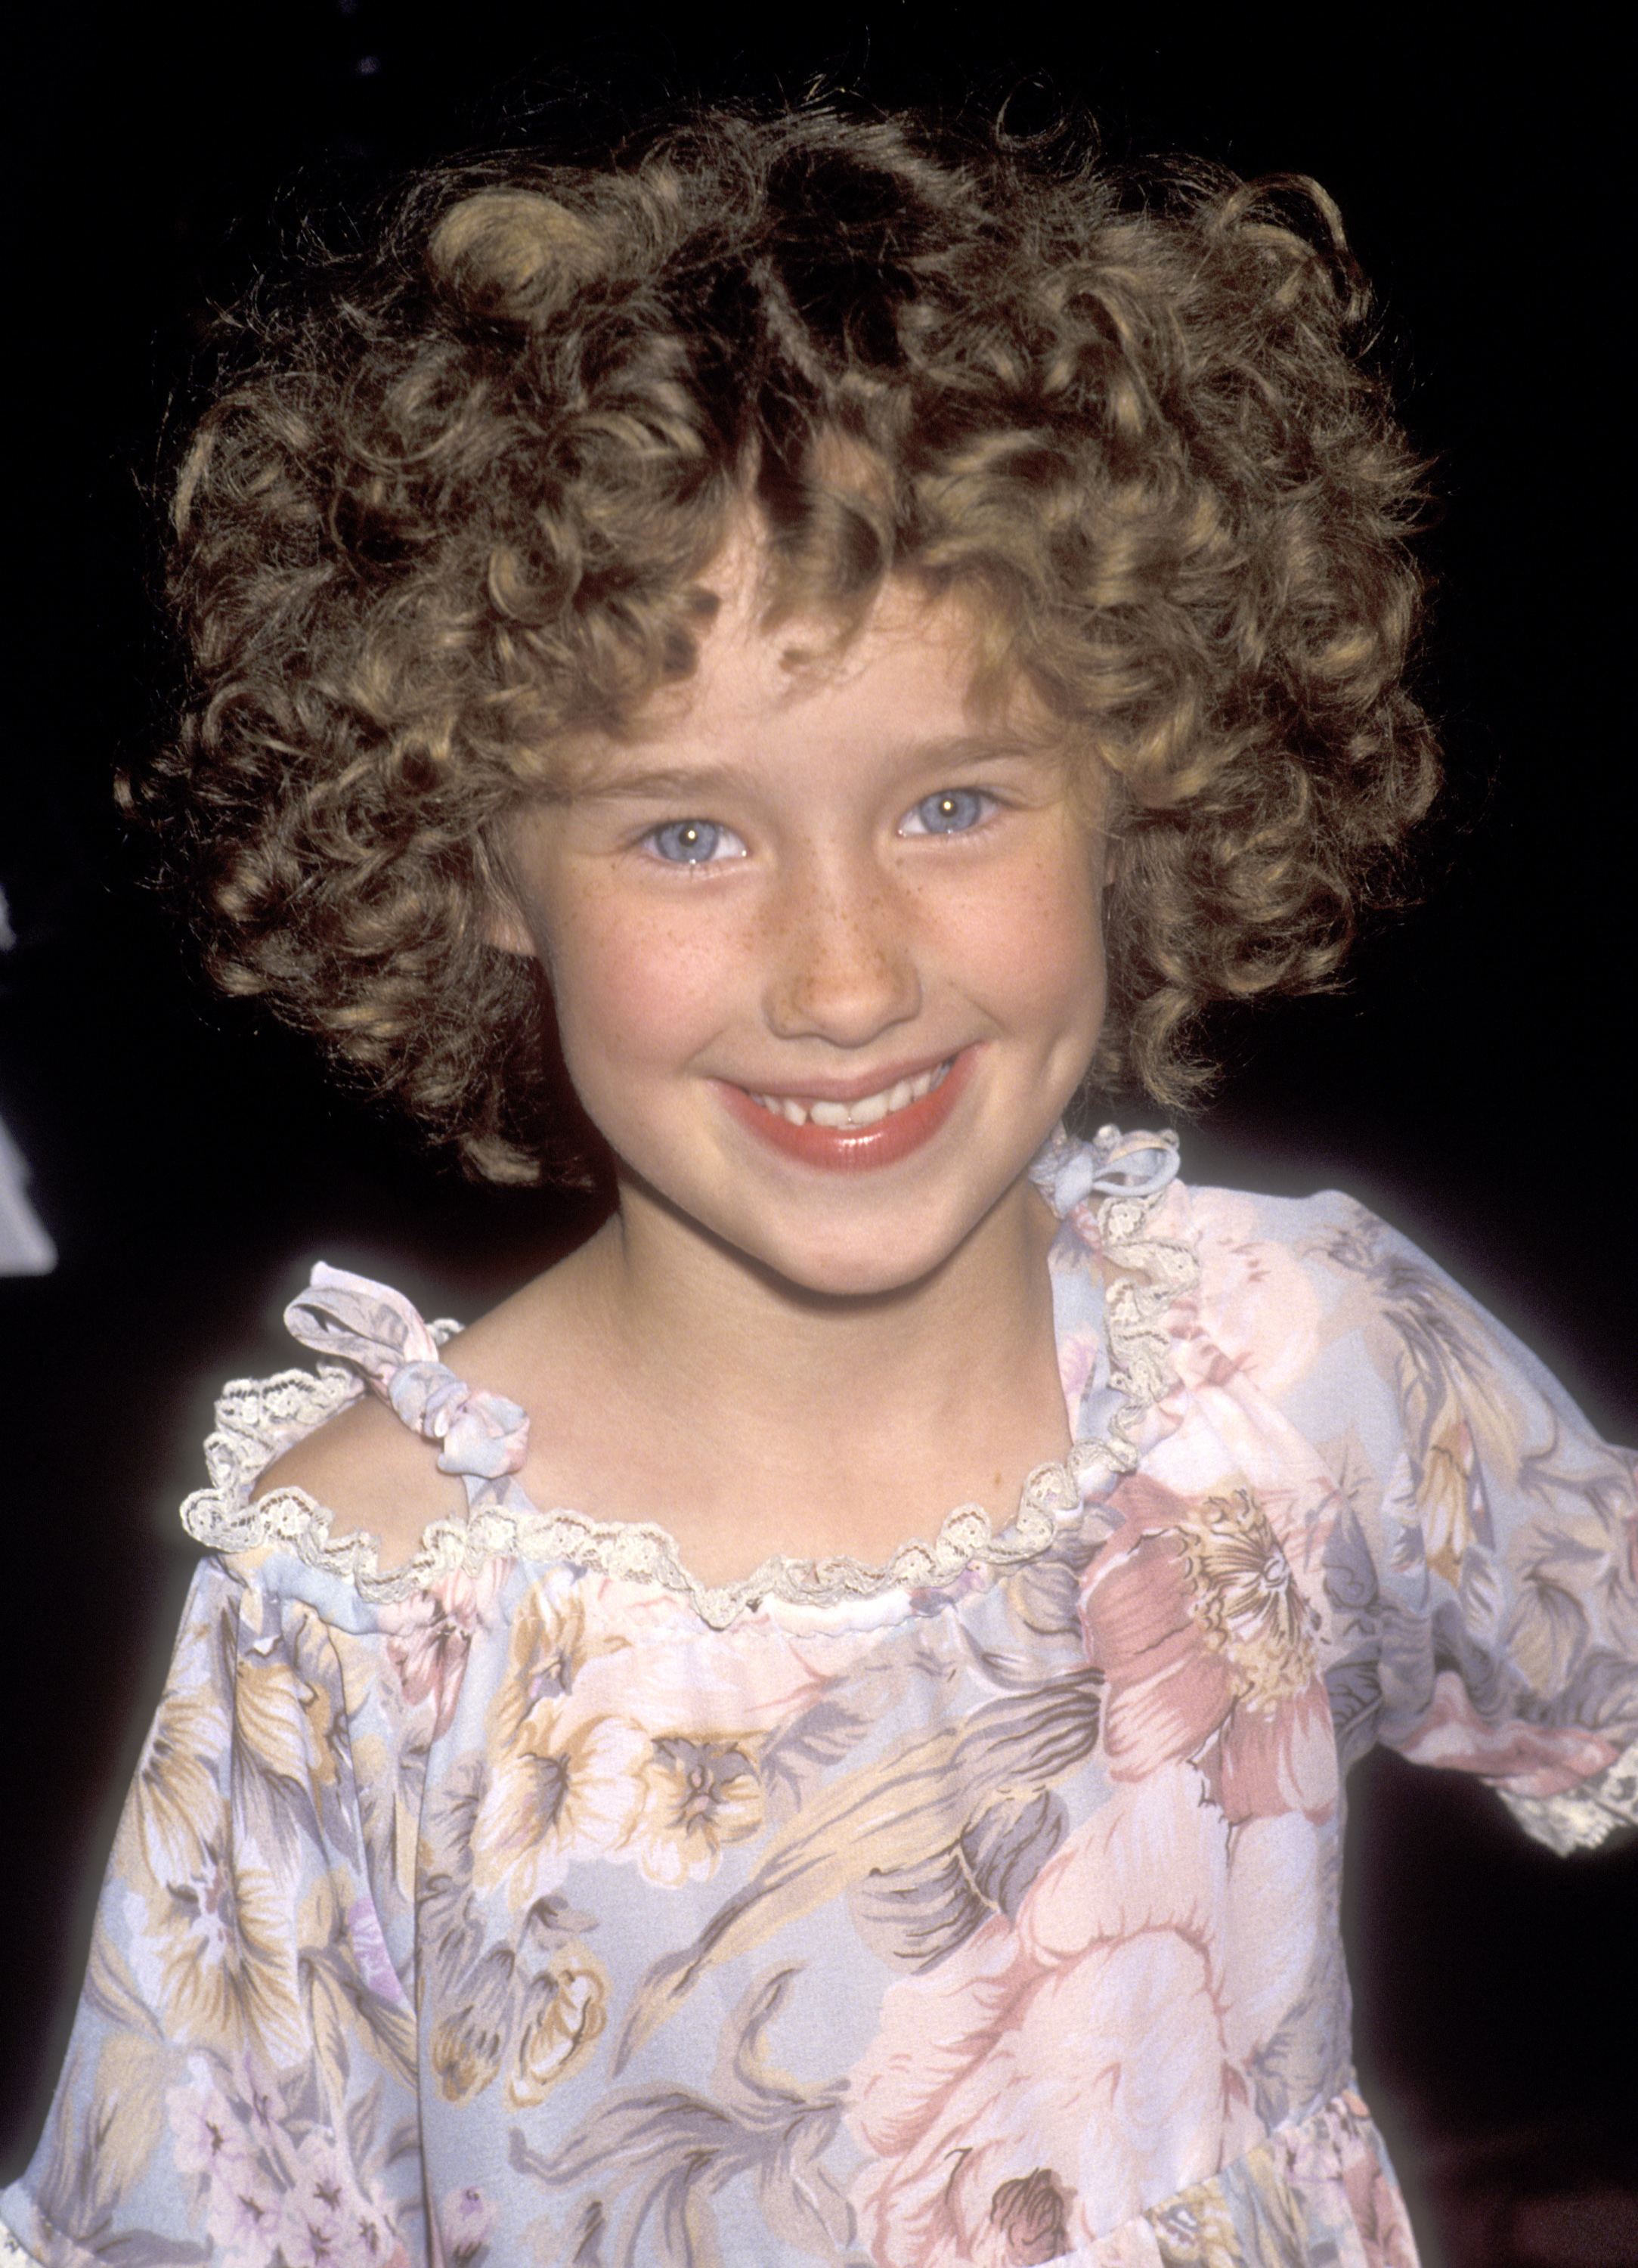 <p>A 6-year-old Ashley Johnson starred on two seasons of "Growing Pains" as Chrissy Seaver. In 1995, she scored the title role in "Annie: A Royal Adventure" and co-starred with Hugh Grant and Julianne Moore in "Nine Months." By the time she played Mel Gibson's teen daughter in "What Women Want" in 2000, there was no question that this moppet was all grown up.</p>